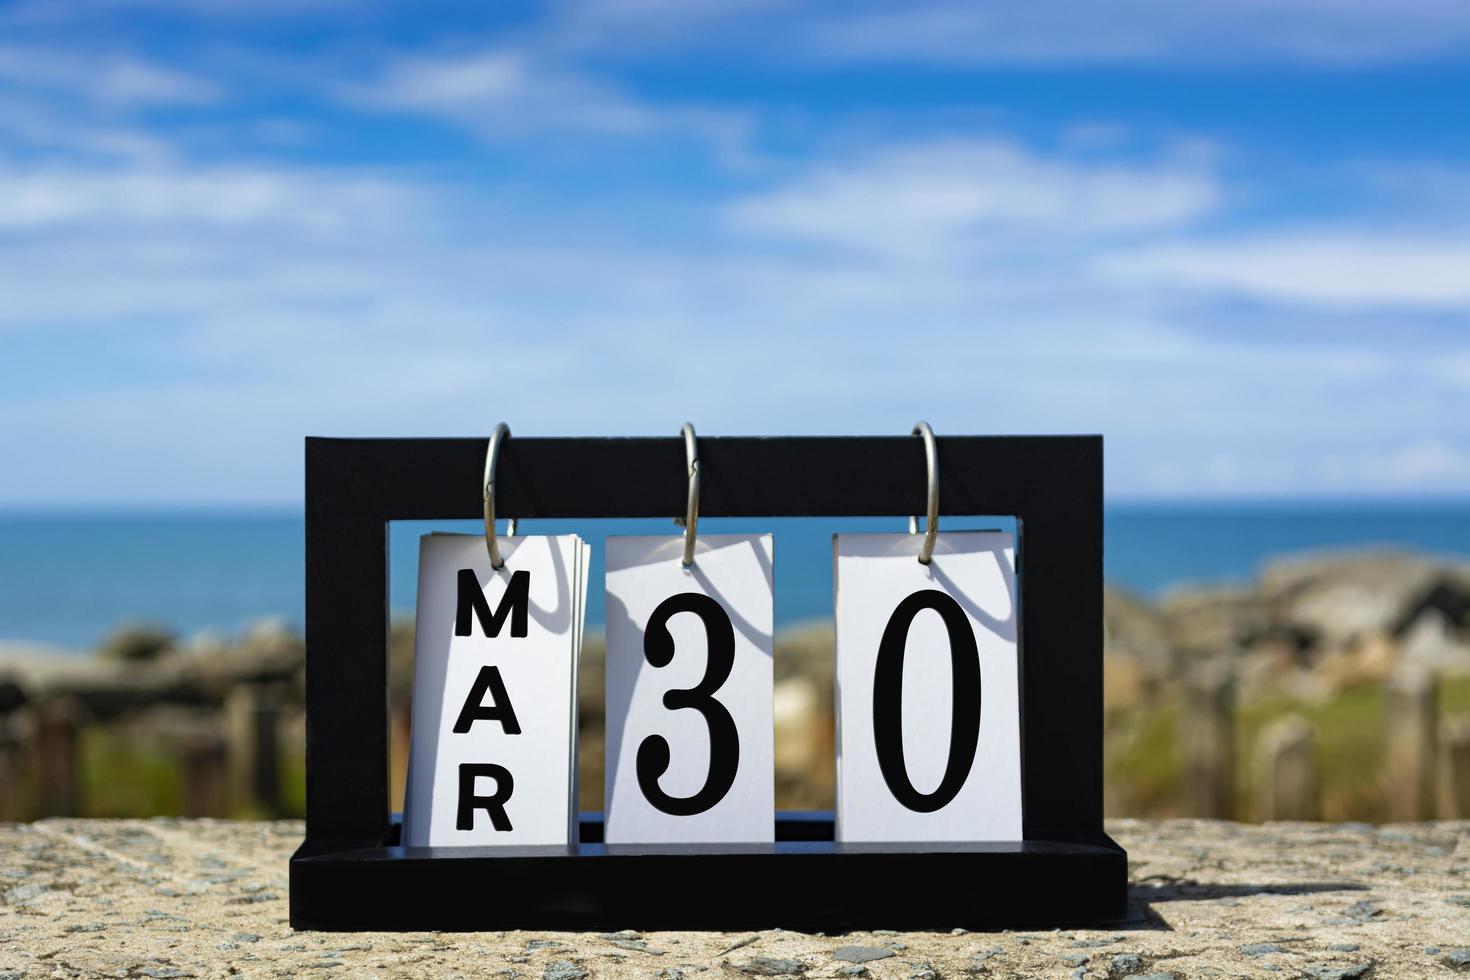 Mar 30 calendar date text on wooden frame with blurred background of ocean. photo